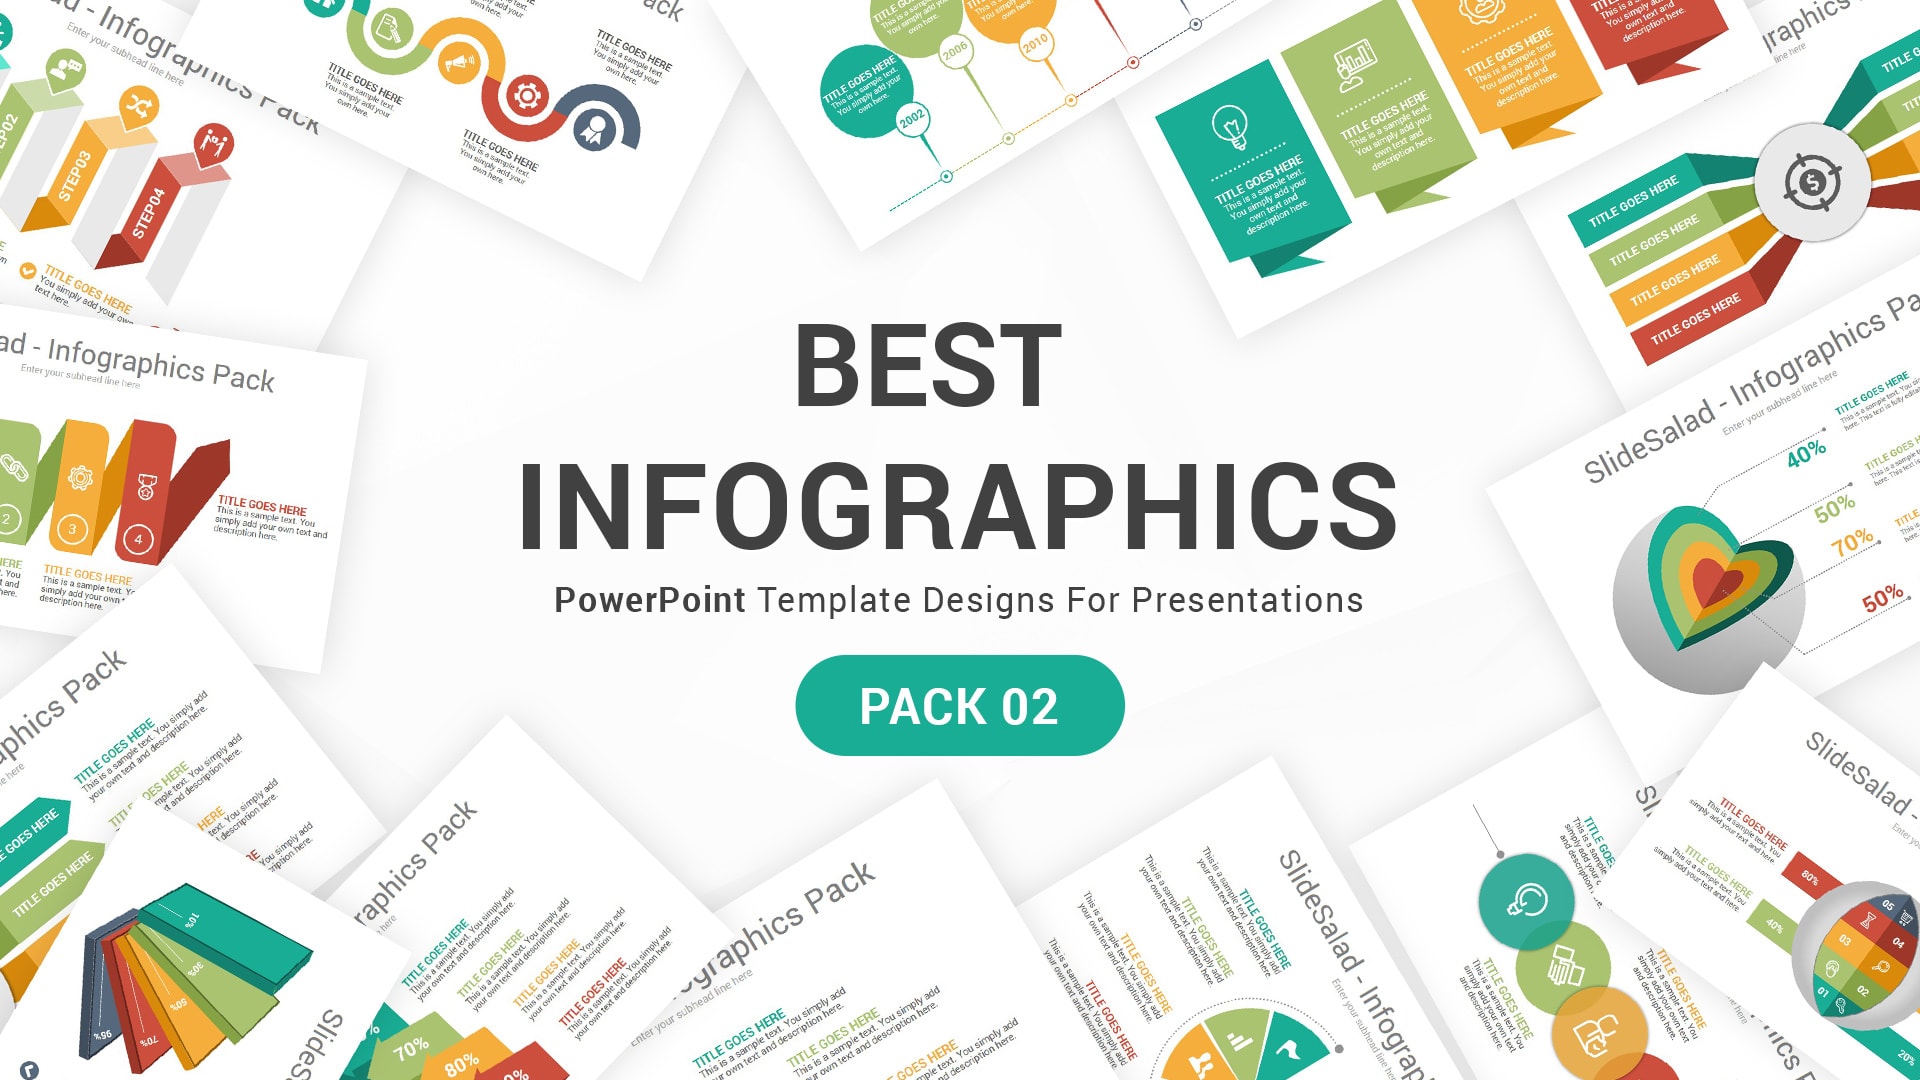 Infographic Designs Pack 02 PowerPoint Template For Presentations